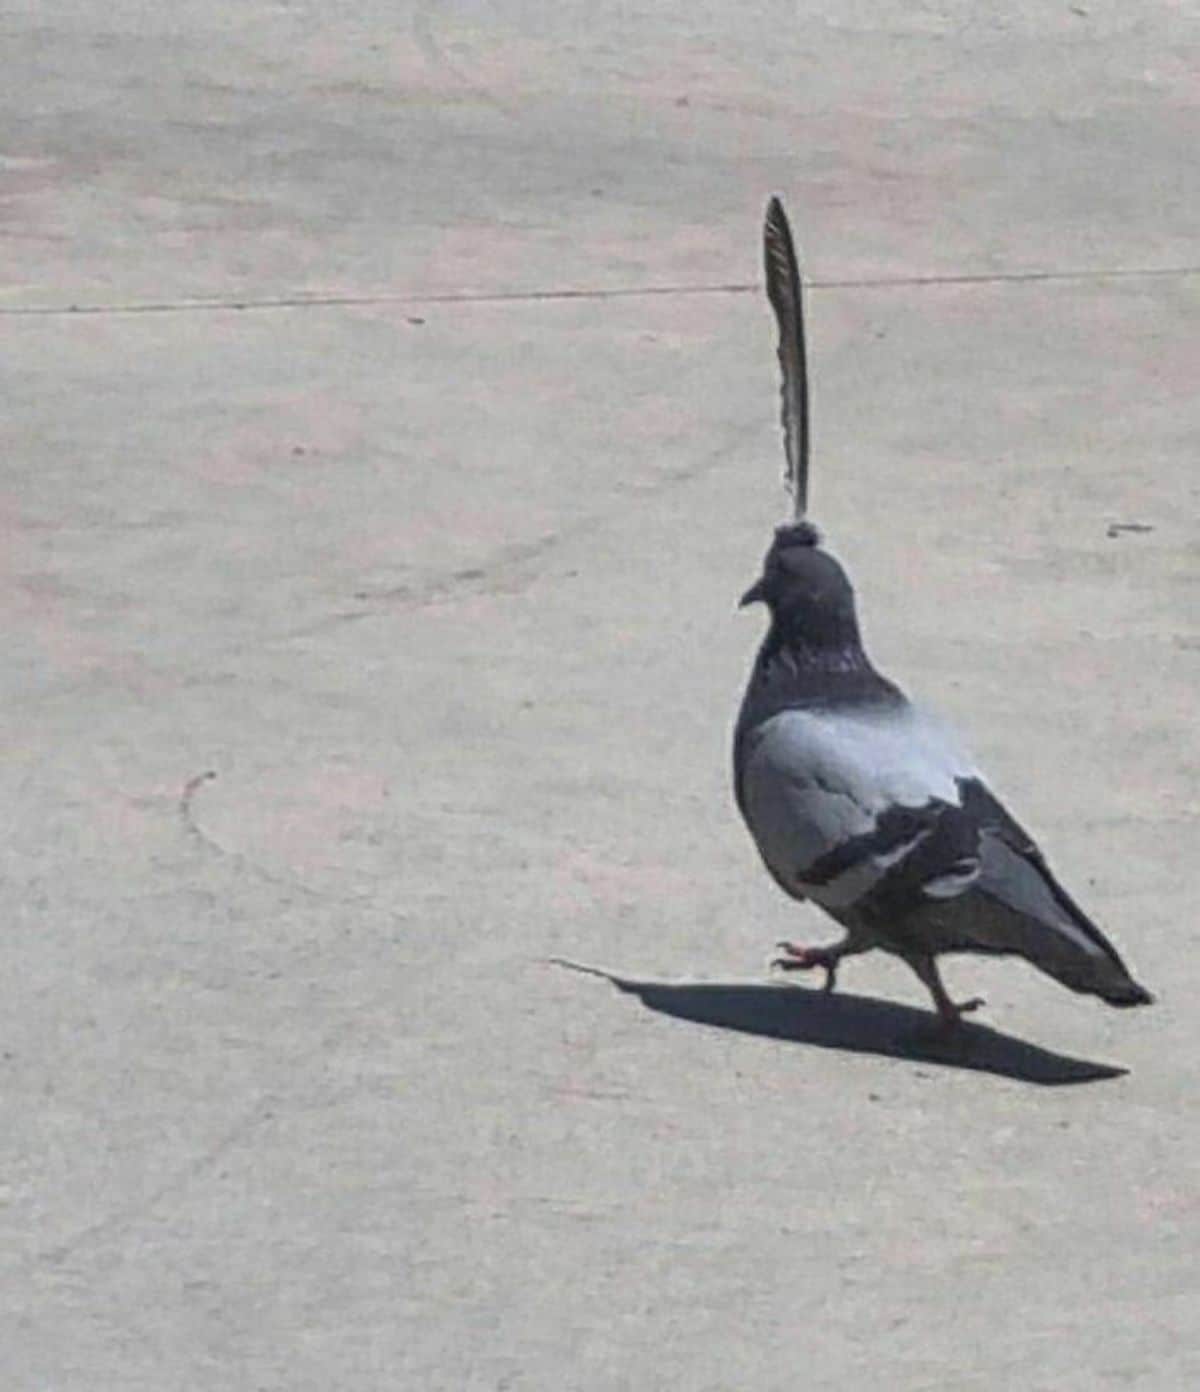 grey pigeon with a black feather standing upright on its head